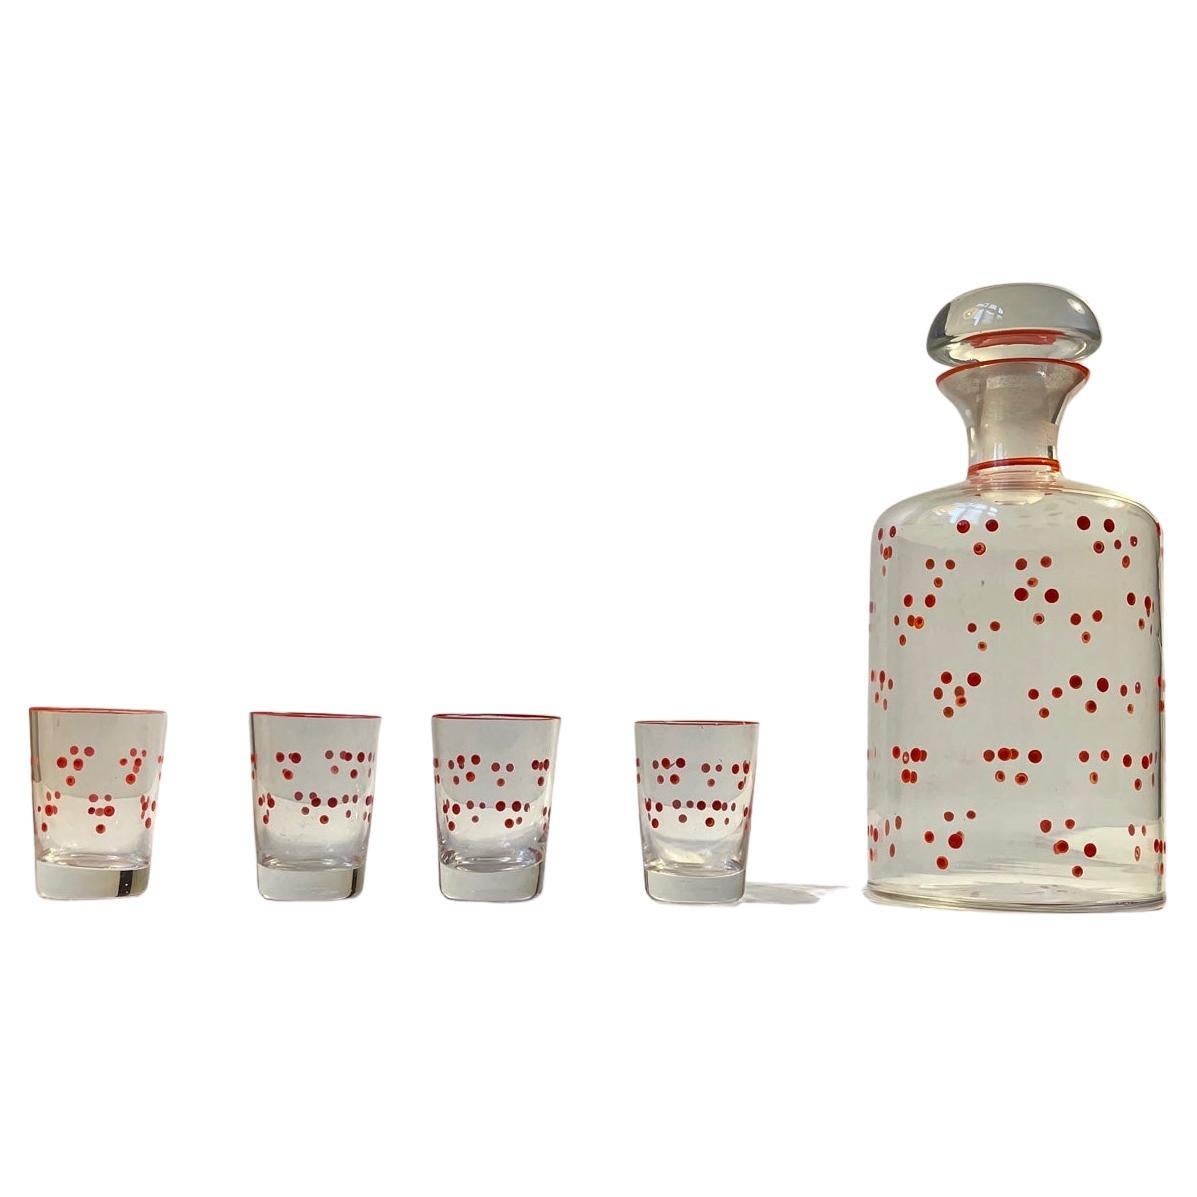 Jacob E. Bang Decanter Set with Red Dots, Holmegaard 1930s, Set of 4